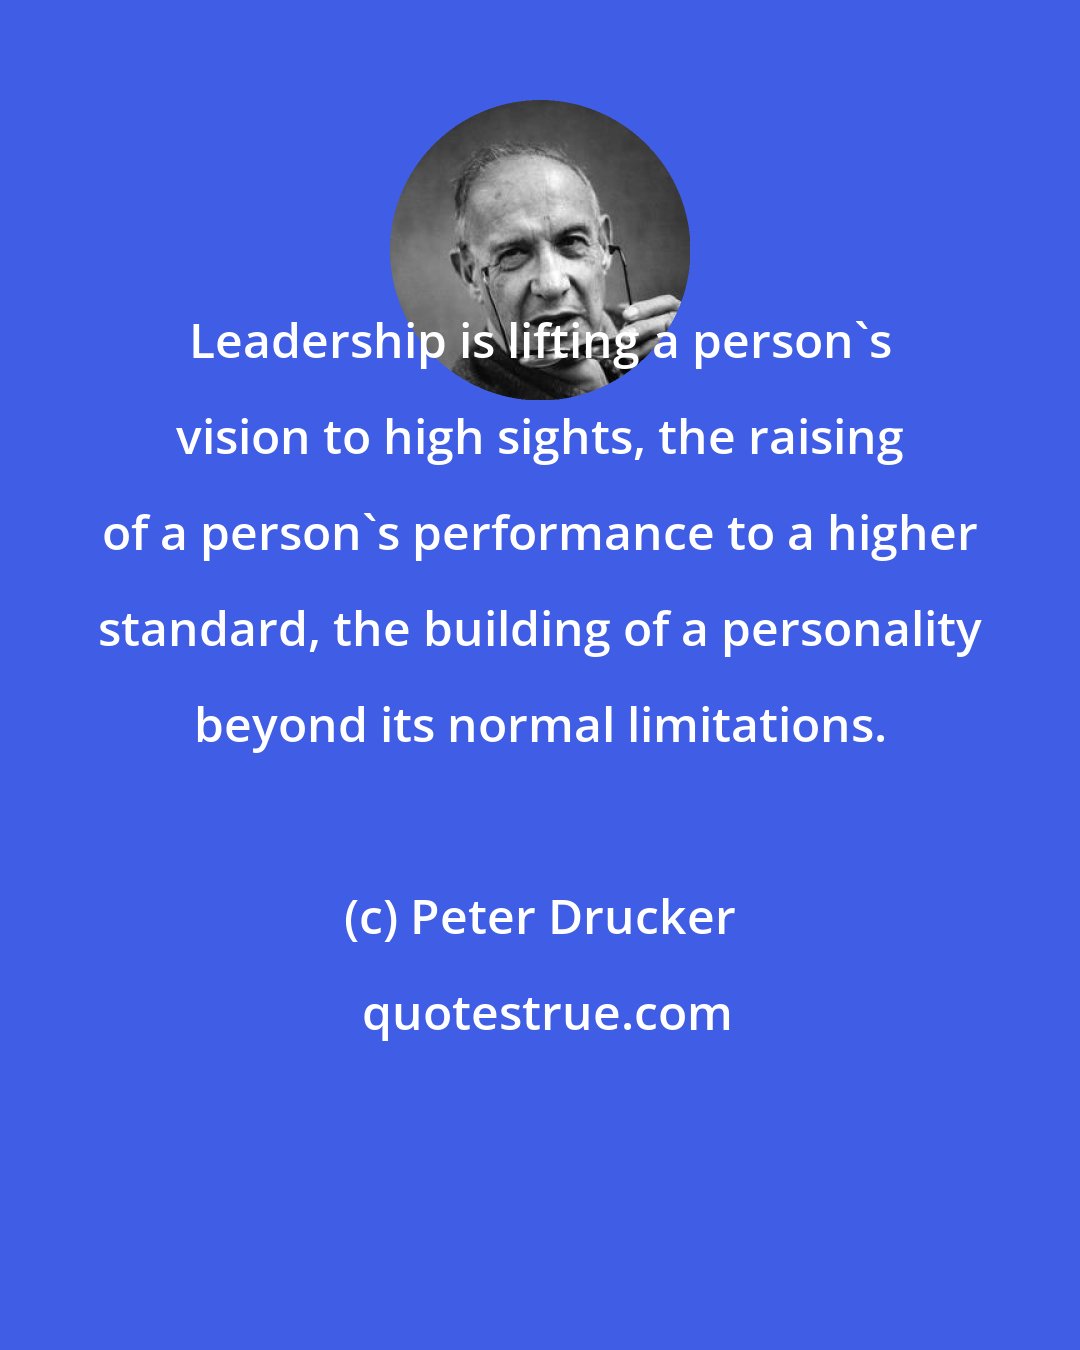 Peter Drucker: Leadership is lifting a person's vision to high sights, the raising of a person's performance to a higher standard, the building of a personality beyond its normal limitations.